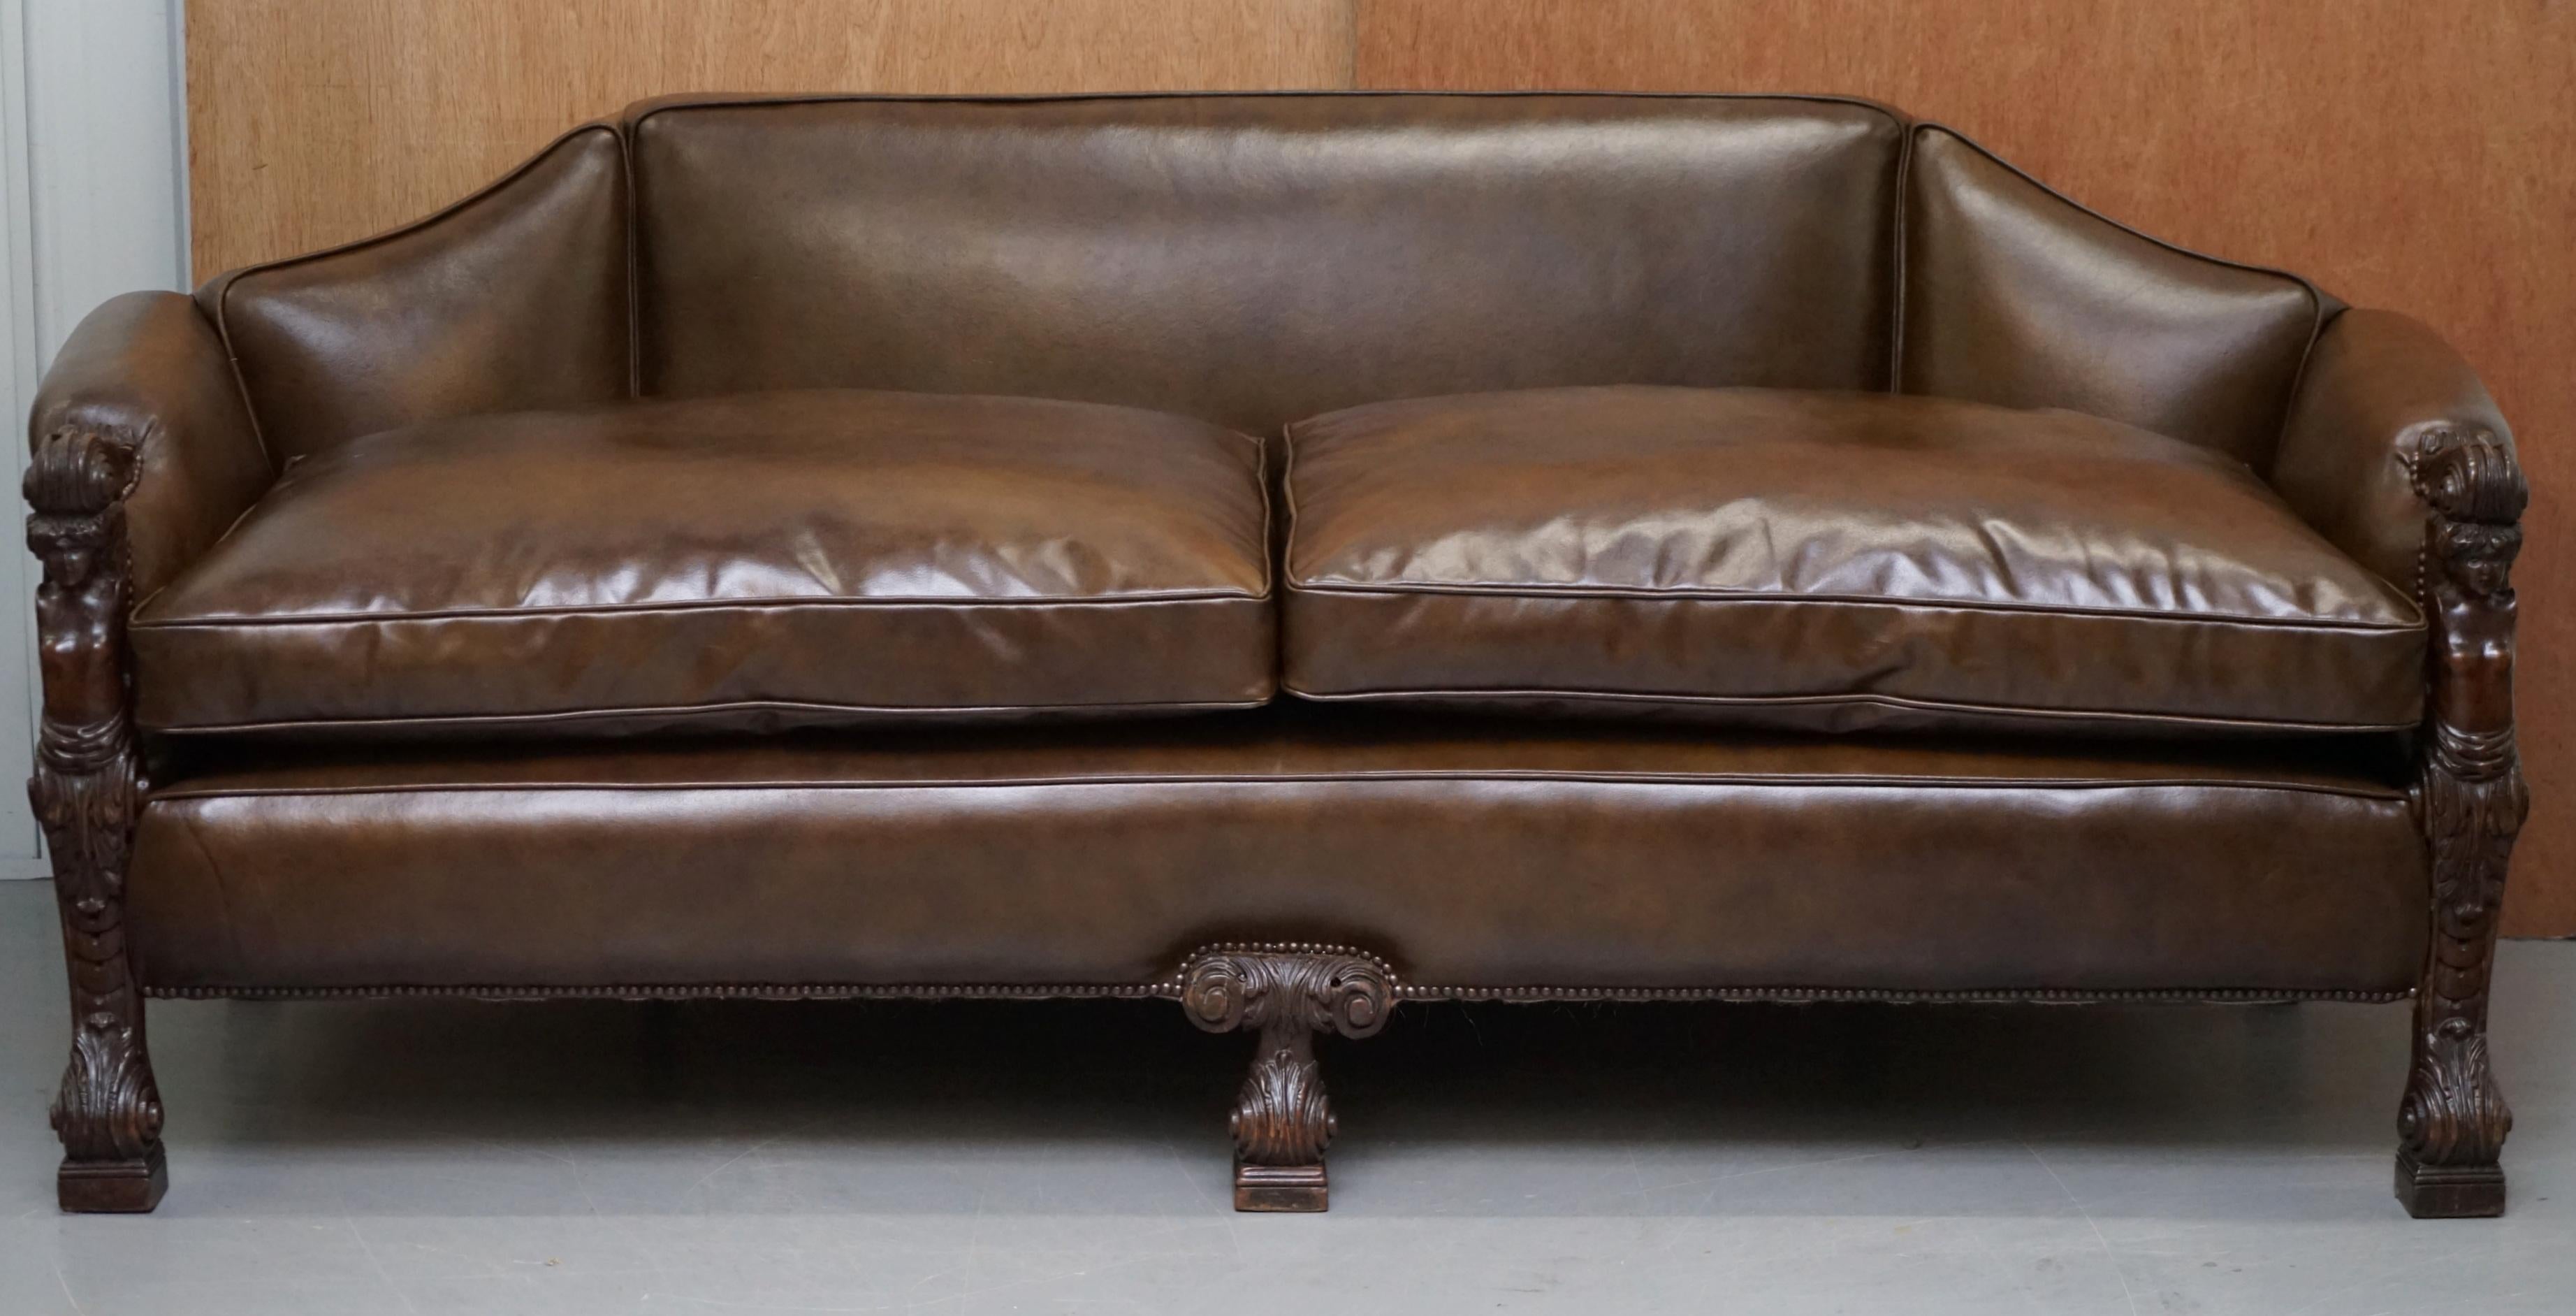 We are delighted to this very rare fully restored Regency circa 1810 brown leather sofa with hand carved mahogany herms statues

A one of kind piece, this original Regency sofa is simply put a work of art. The carvings to the arms represent Herms